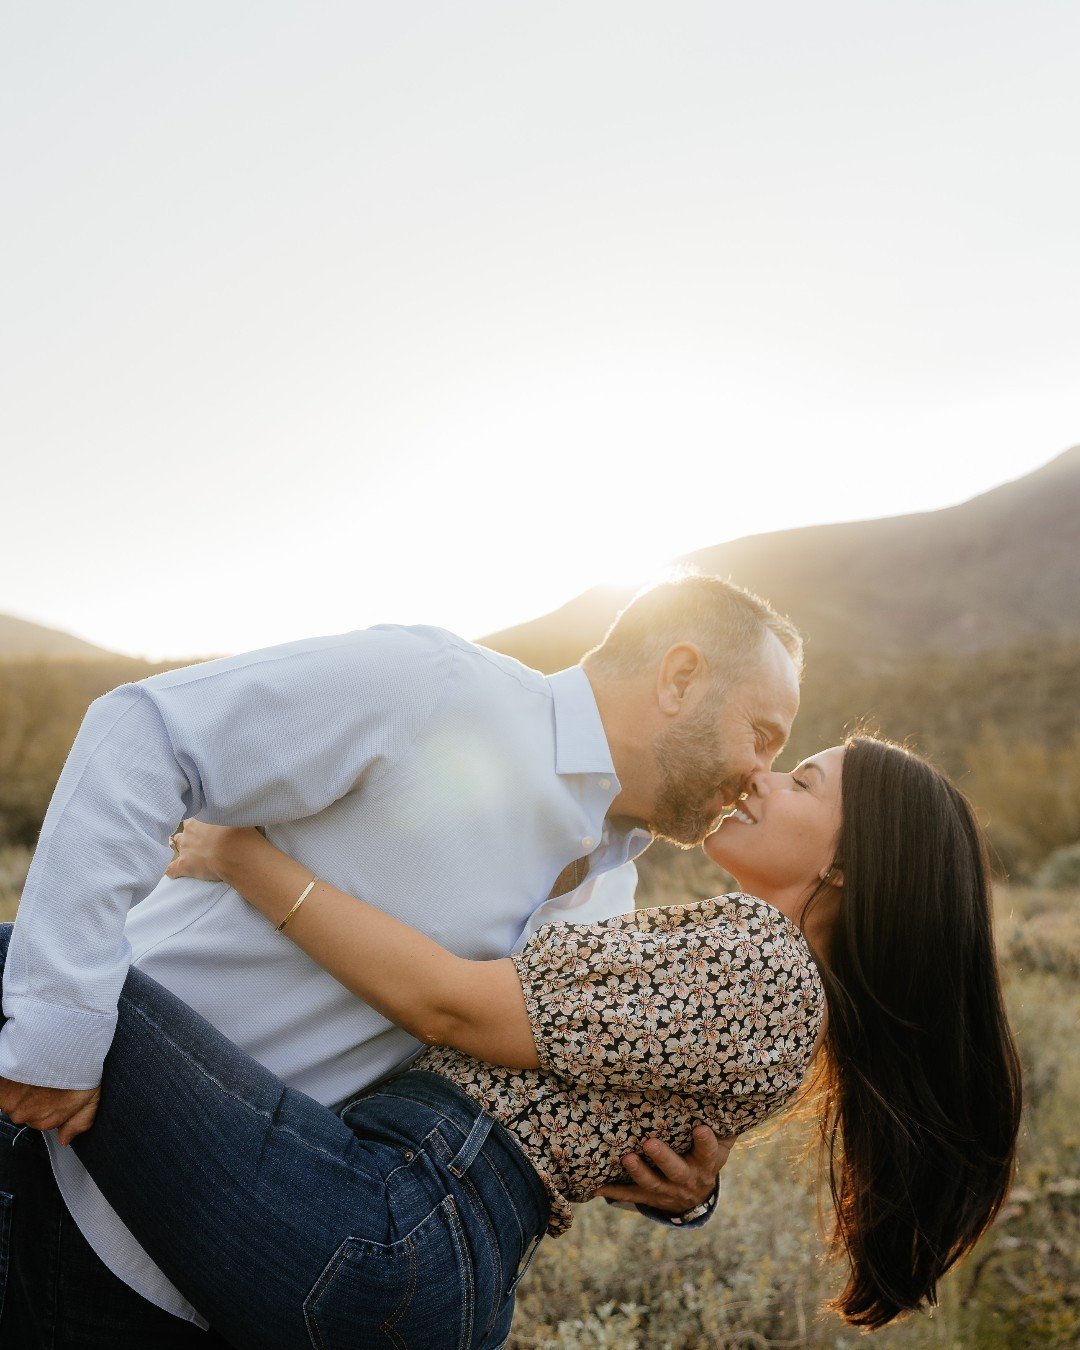 only the dreamiest engagement shoot you ever did see &mdash; ✨
&bull;
&bull;
&bull;
&bull;
&bull;
&bull;
&bull;
&bull;
#arizonaphotographer
#arizonaengagementphotographer
#arizonacouplesphotographer
#arizonacouplephotographer
#arizonaweddingphotograp